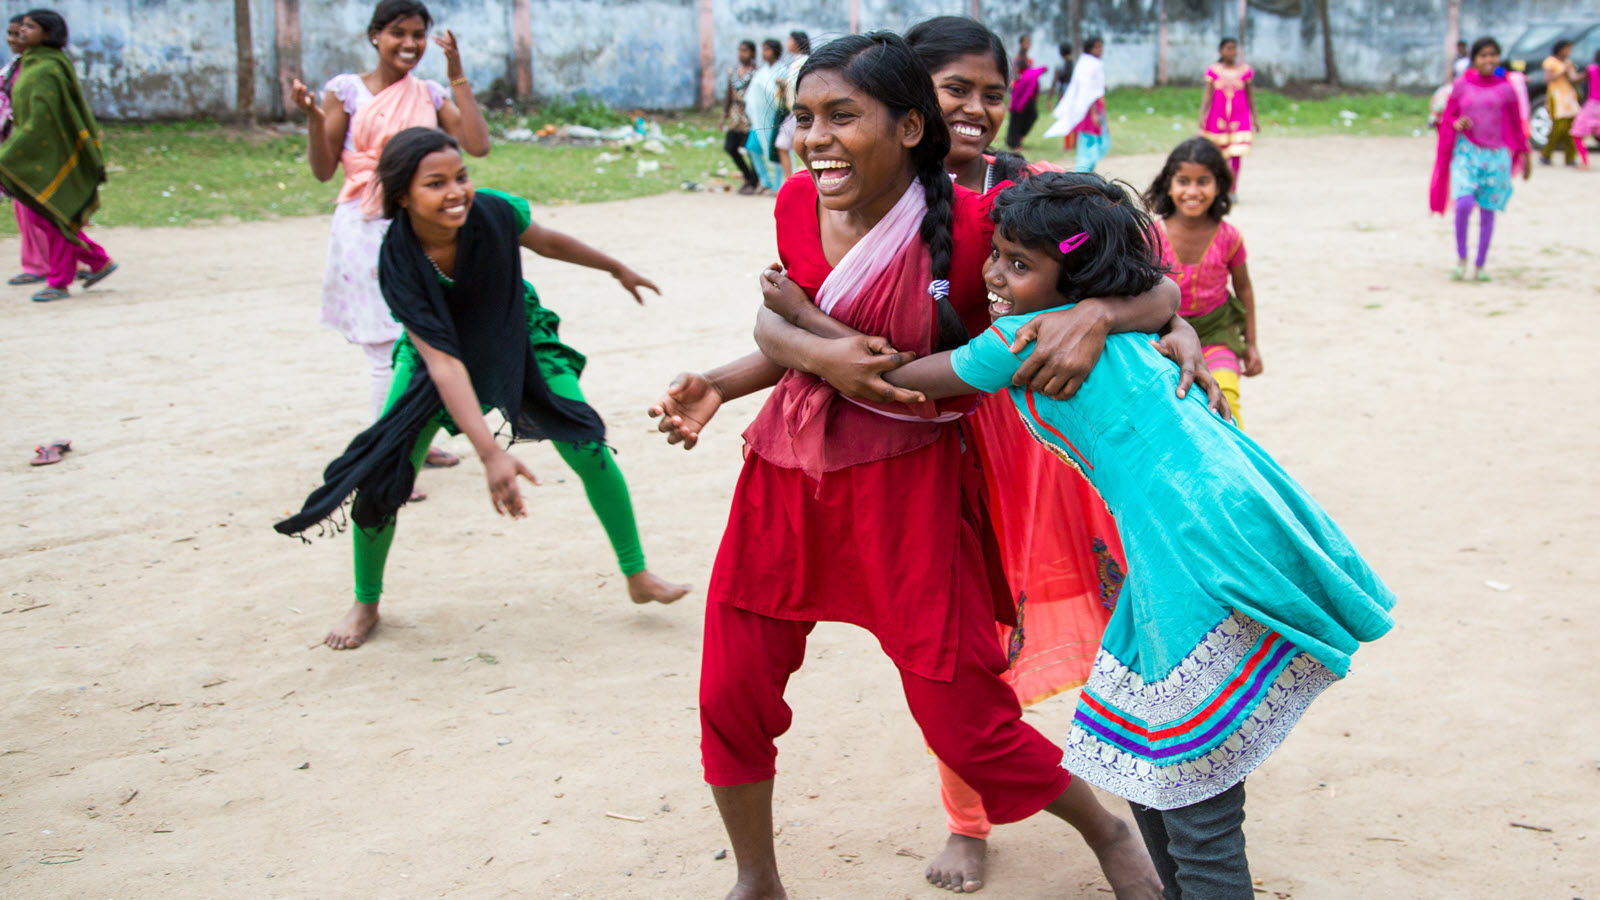 Girls studying at the Prerna School run by Sudha Varghese's Nari Gunjan, play in front of the school in Danapur, Bihar, India, on March 15, 2015.